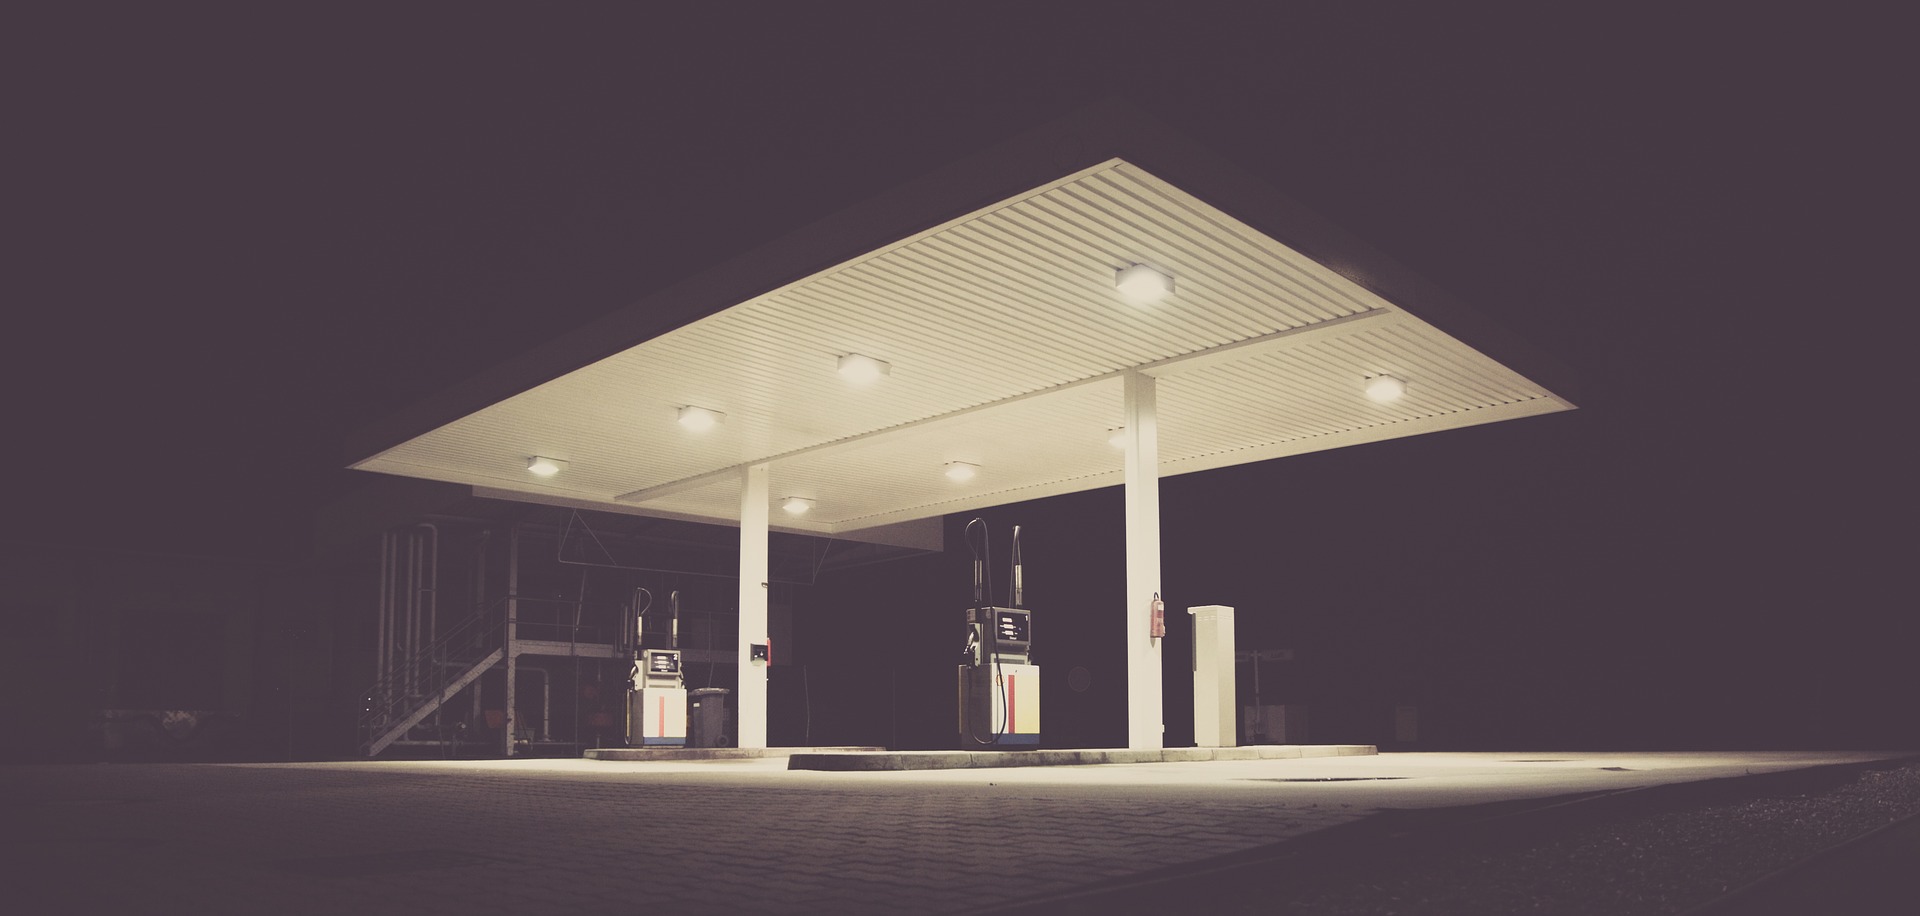 More and more gas stations have been forced to close, risking hijacking